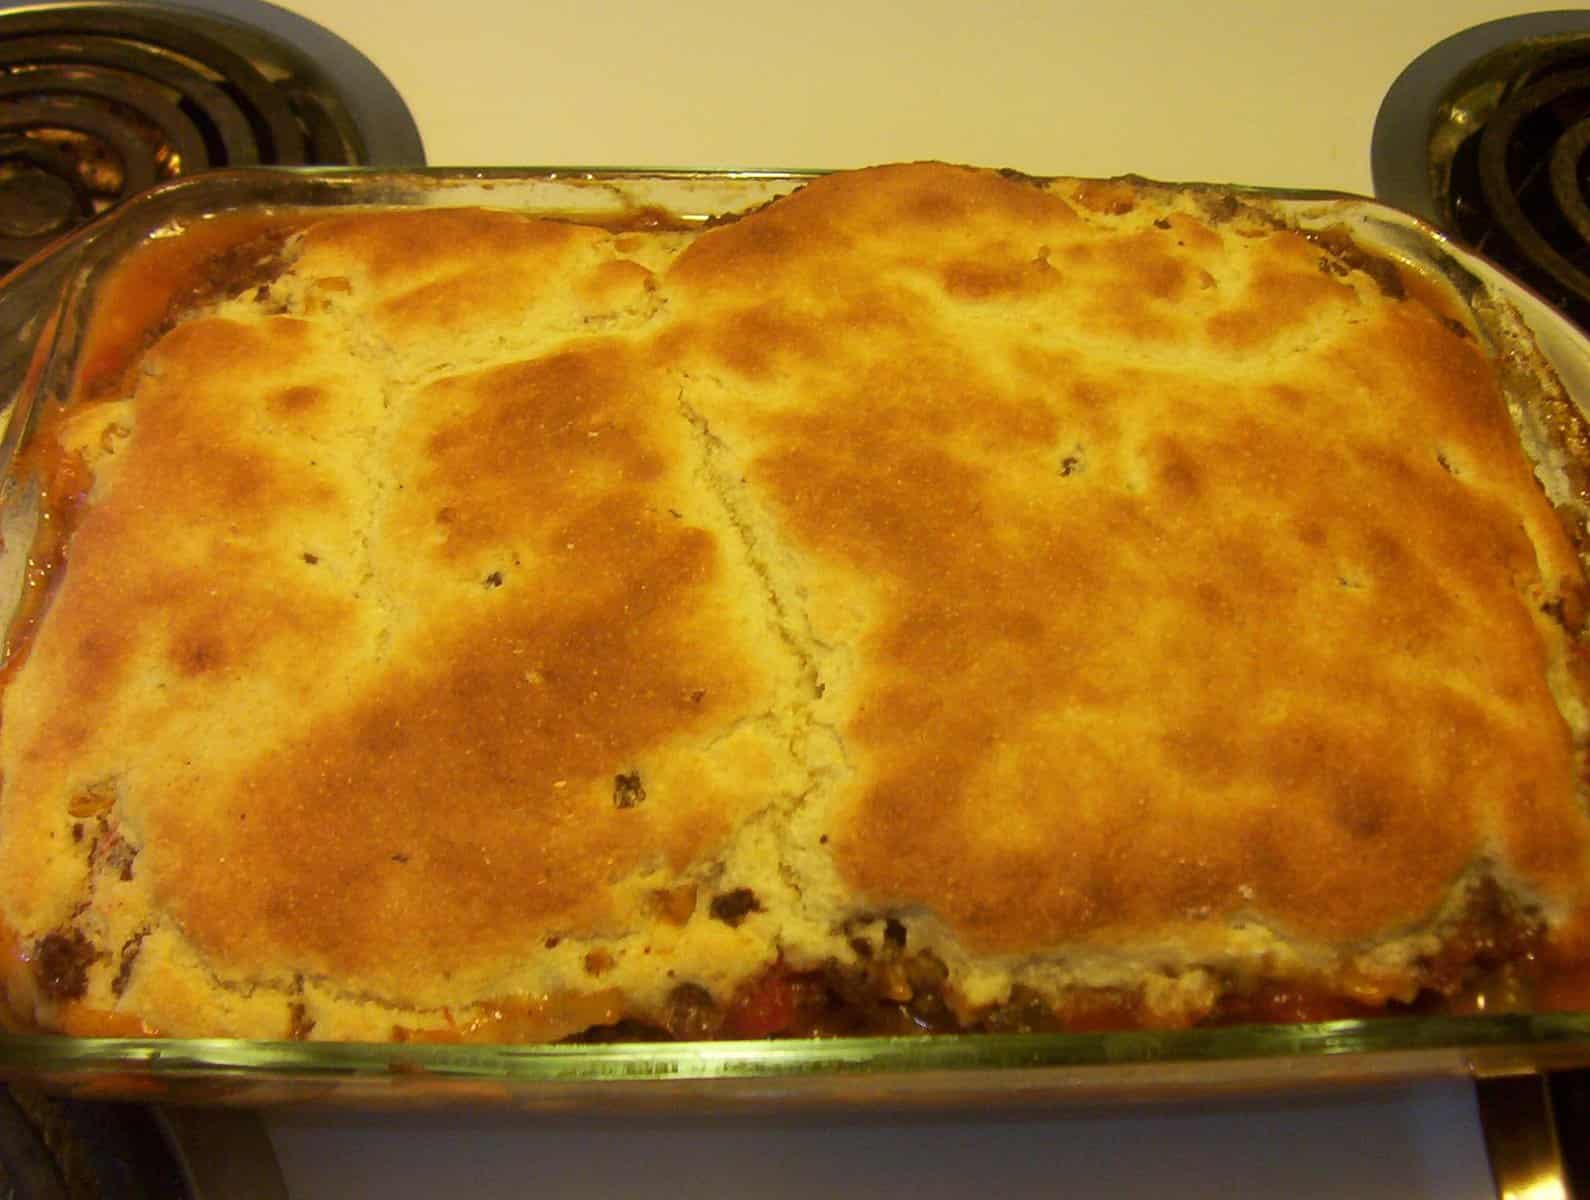  Grandma's Hamburger Pie with Cornbread Topping: A savory and satisfying dish that will take you back to your childhood.